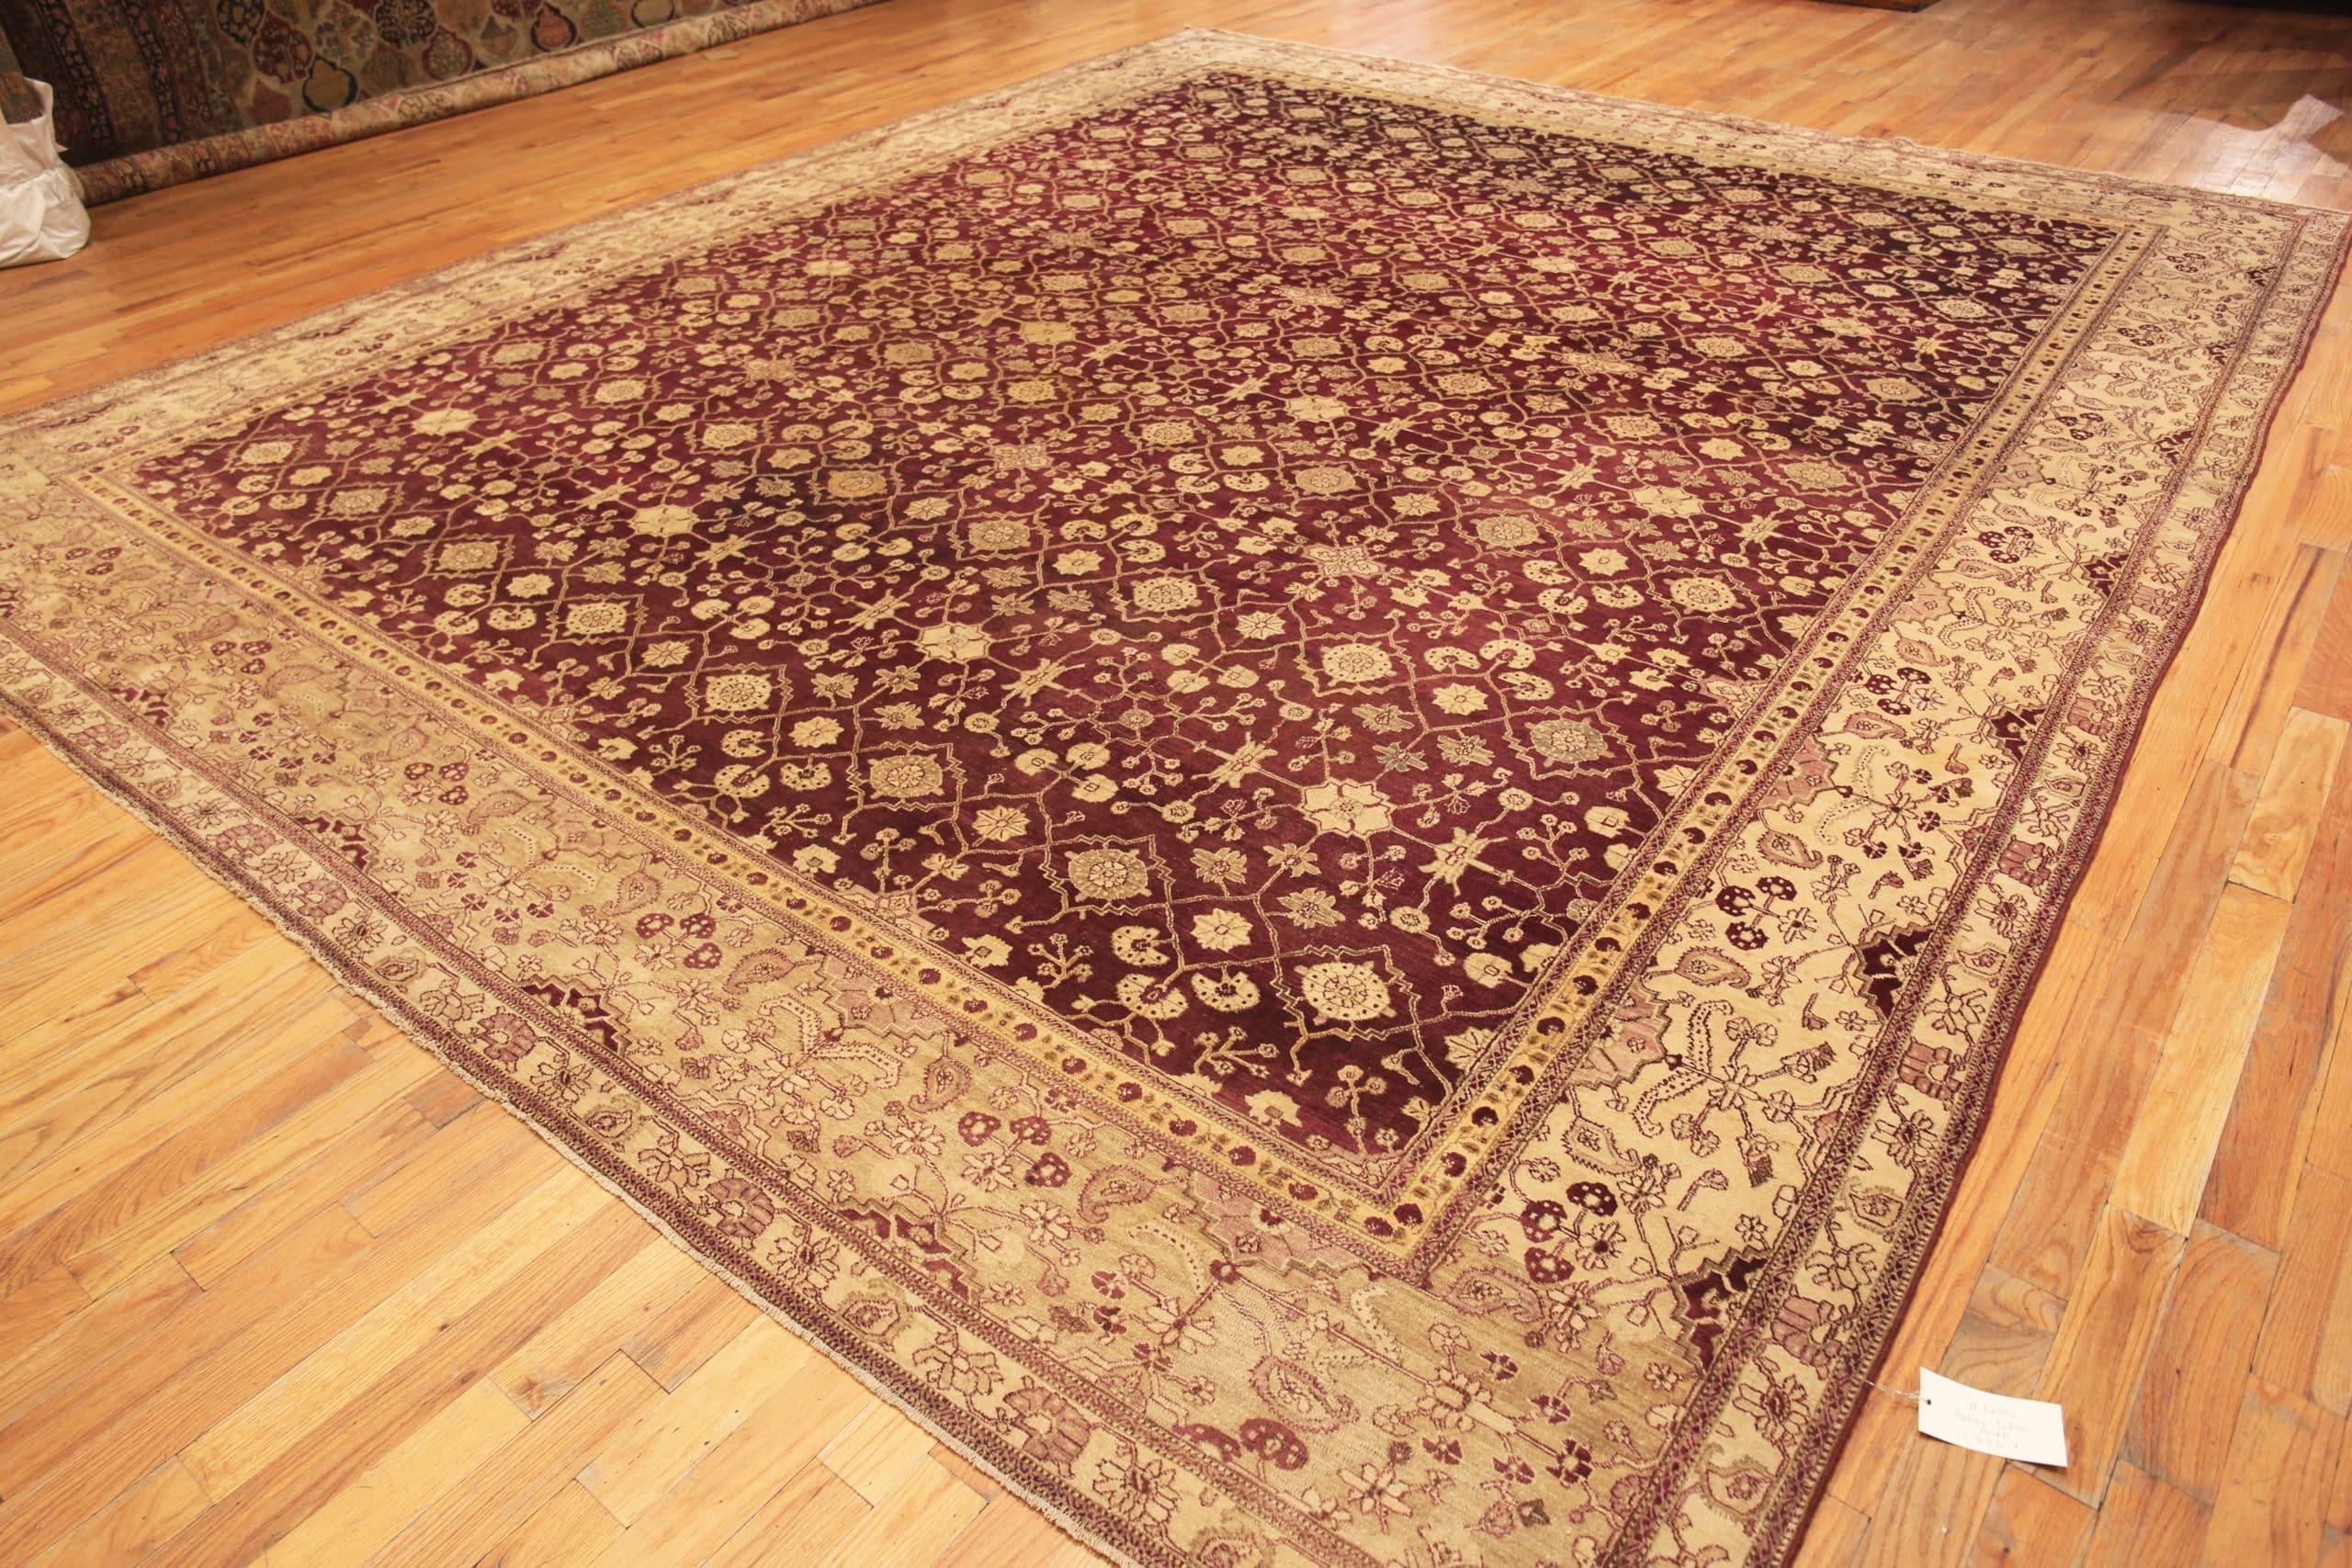 Beautiful Large Antique Indian Agra Rug, Country of Origin:  India, Circa Date: 1900 – The city of Agra, India, has an extensive history of making exquisite rugs and many other Indian arts. The story of this rug began in the 1600s and tells an